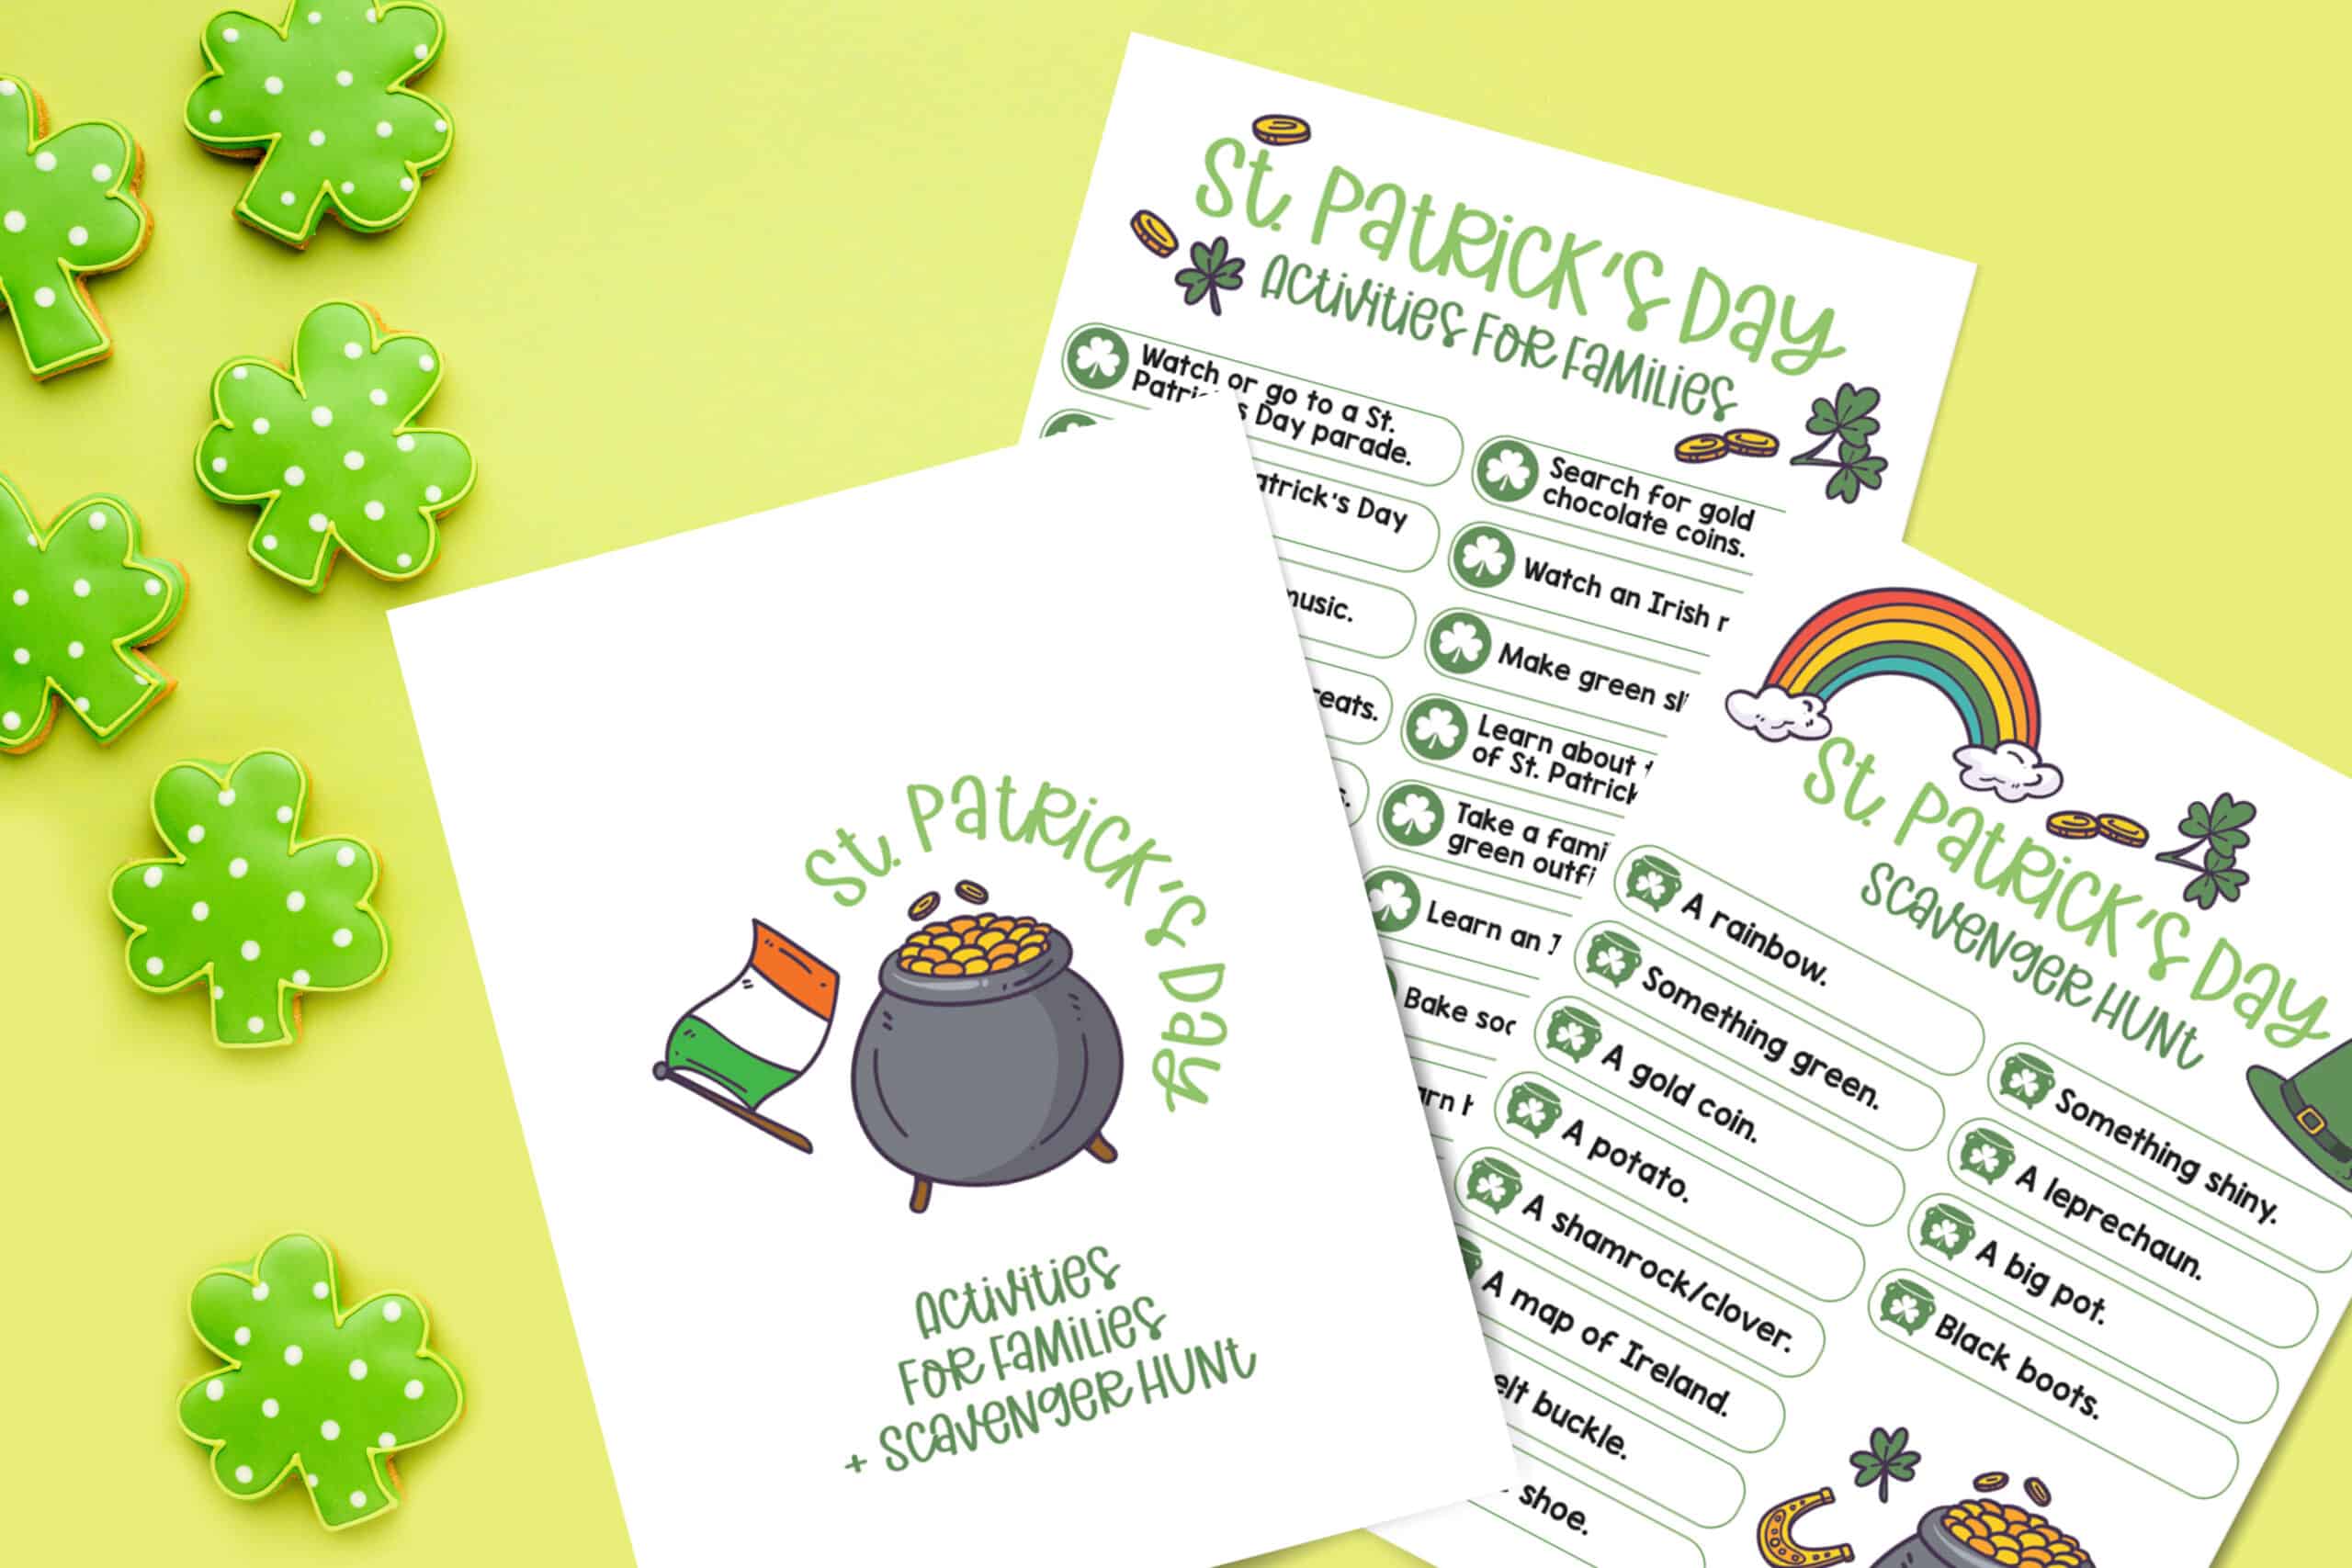 St. Patrick’s Day Scavenger Hunt + Activities for Families